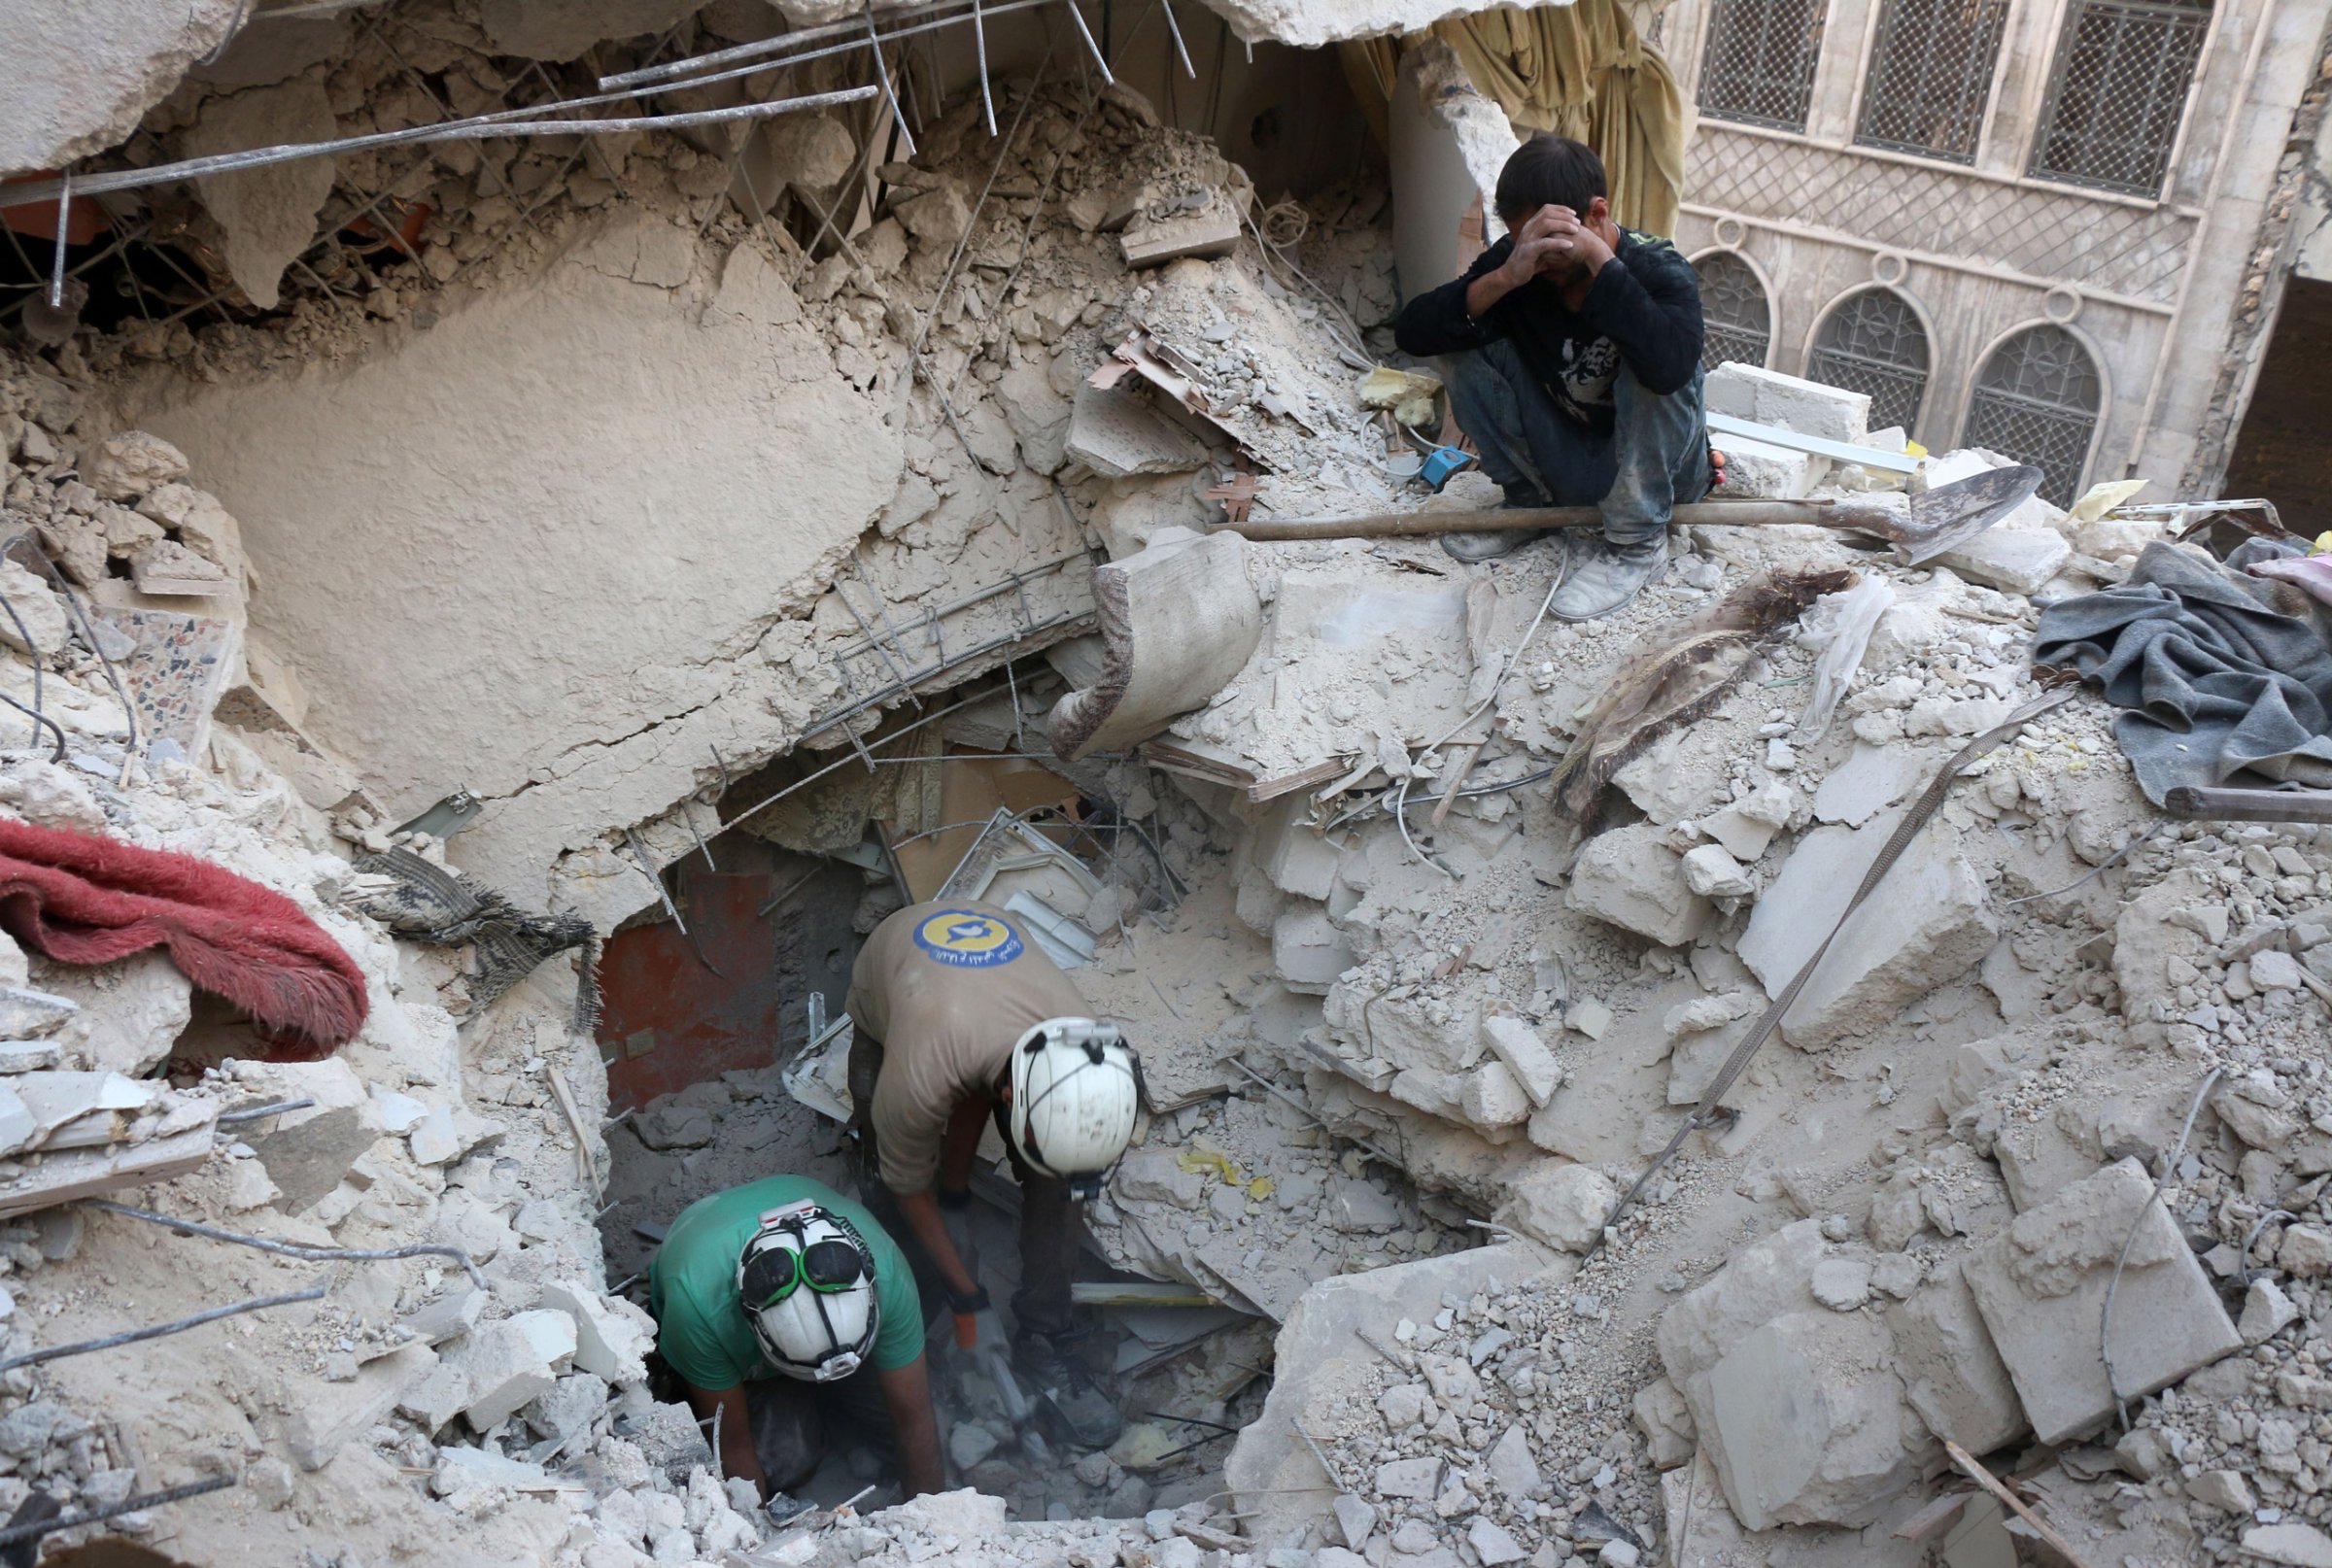 TOPSHOT - Syrian civil defence volunteers, known as the White Helmets, search for victims amid the rubble of destroyed buildings following a government forces air strike on the rebel-held neighbourhood of Bustan al-Basha in the northern city of Aleppo, on October 4, 2016. Assad's forces advanced on rebels during intense street fighting in the opposition-held east of Aleppo city, which Russia has been accused of bombing indiscriminately including targeting its hospitals. / AFP / THAER MOHAMMED (Photo credit should read THAER MOHAMMED/AFP/Getty Images)